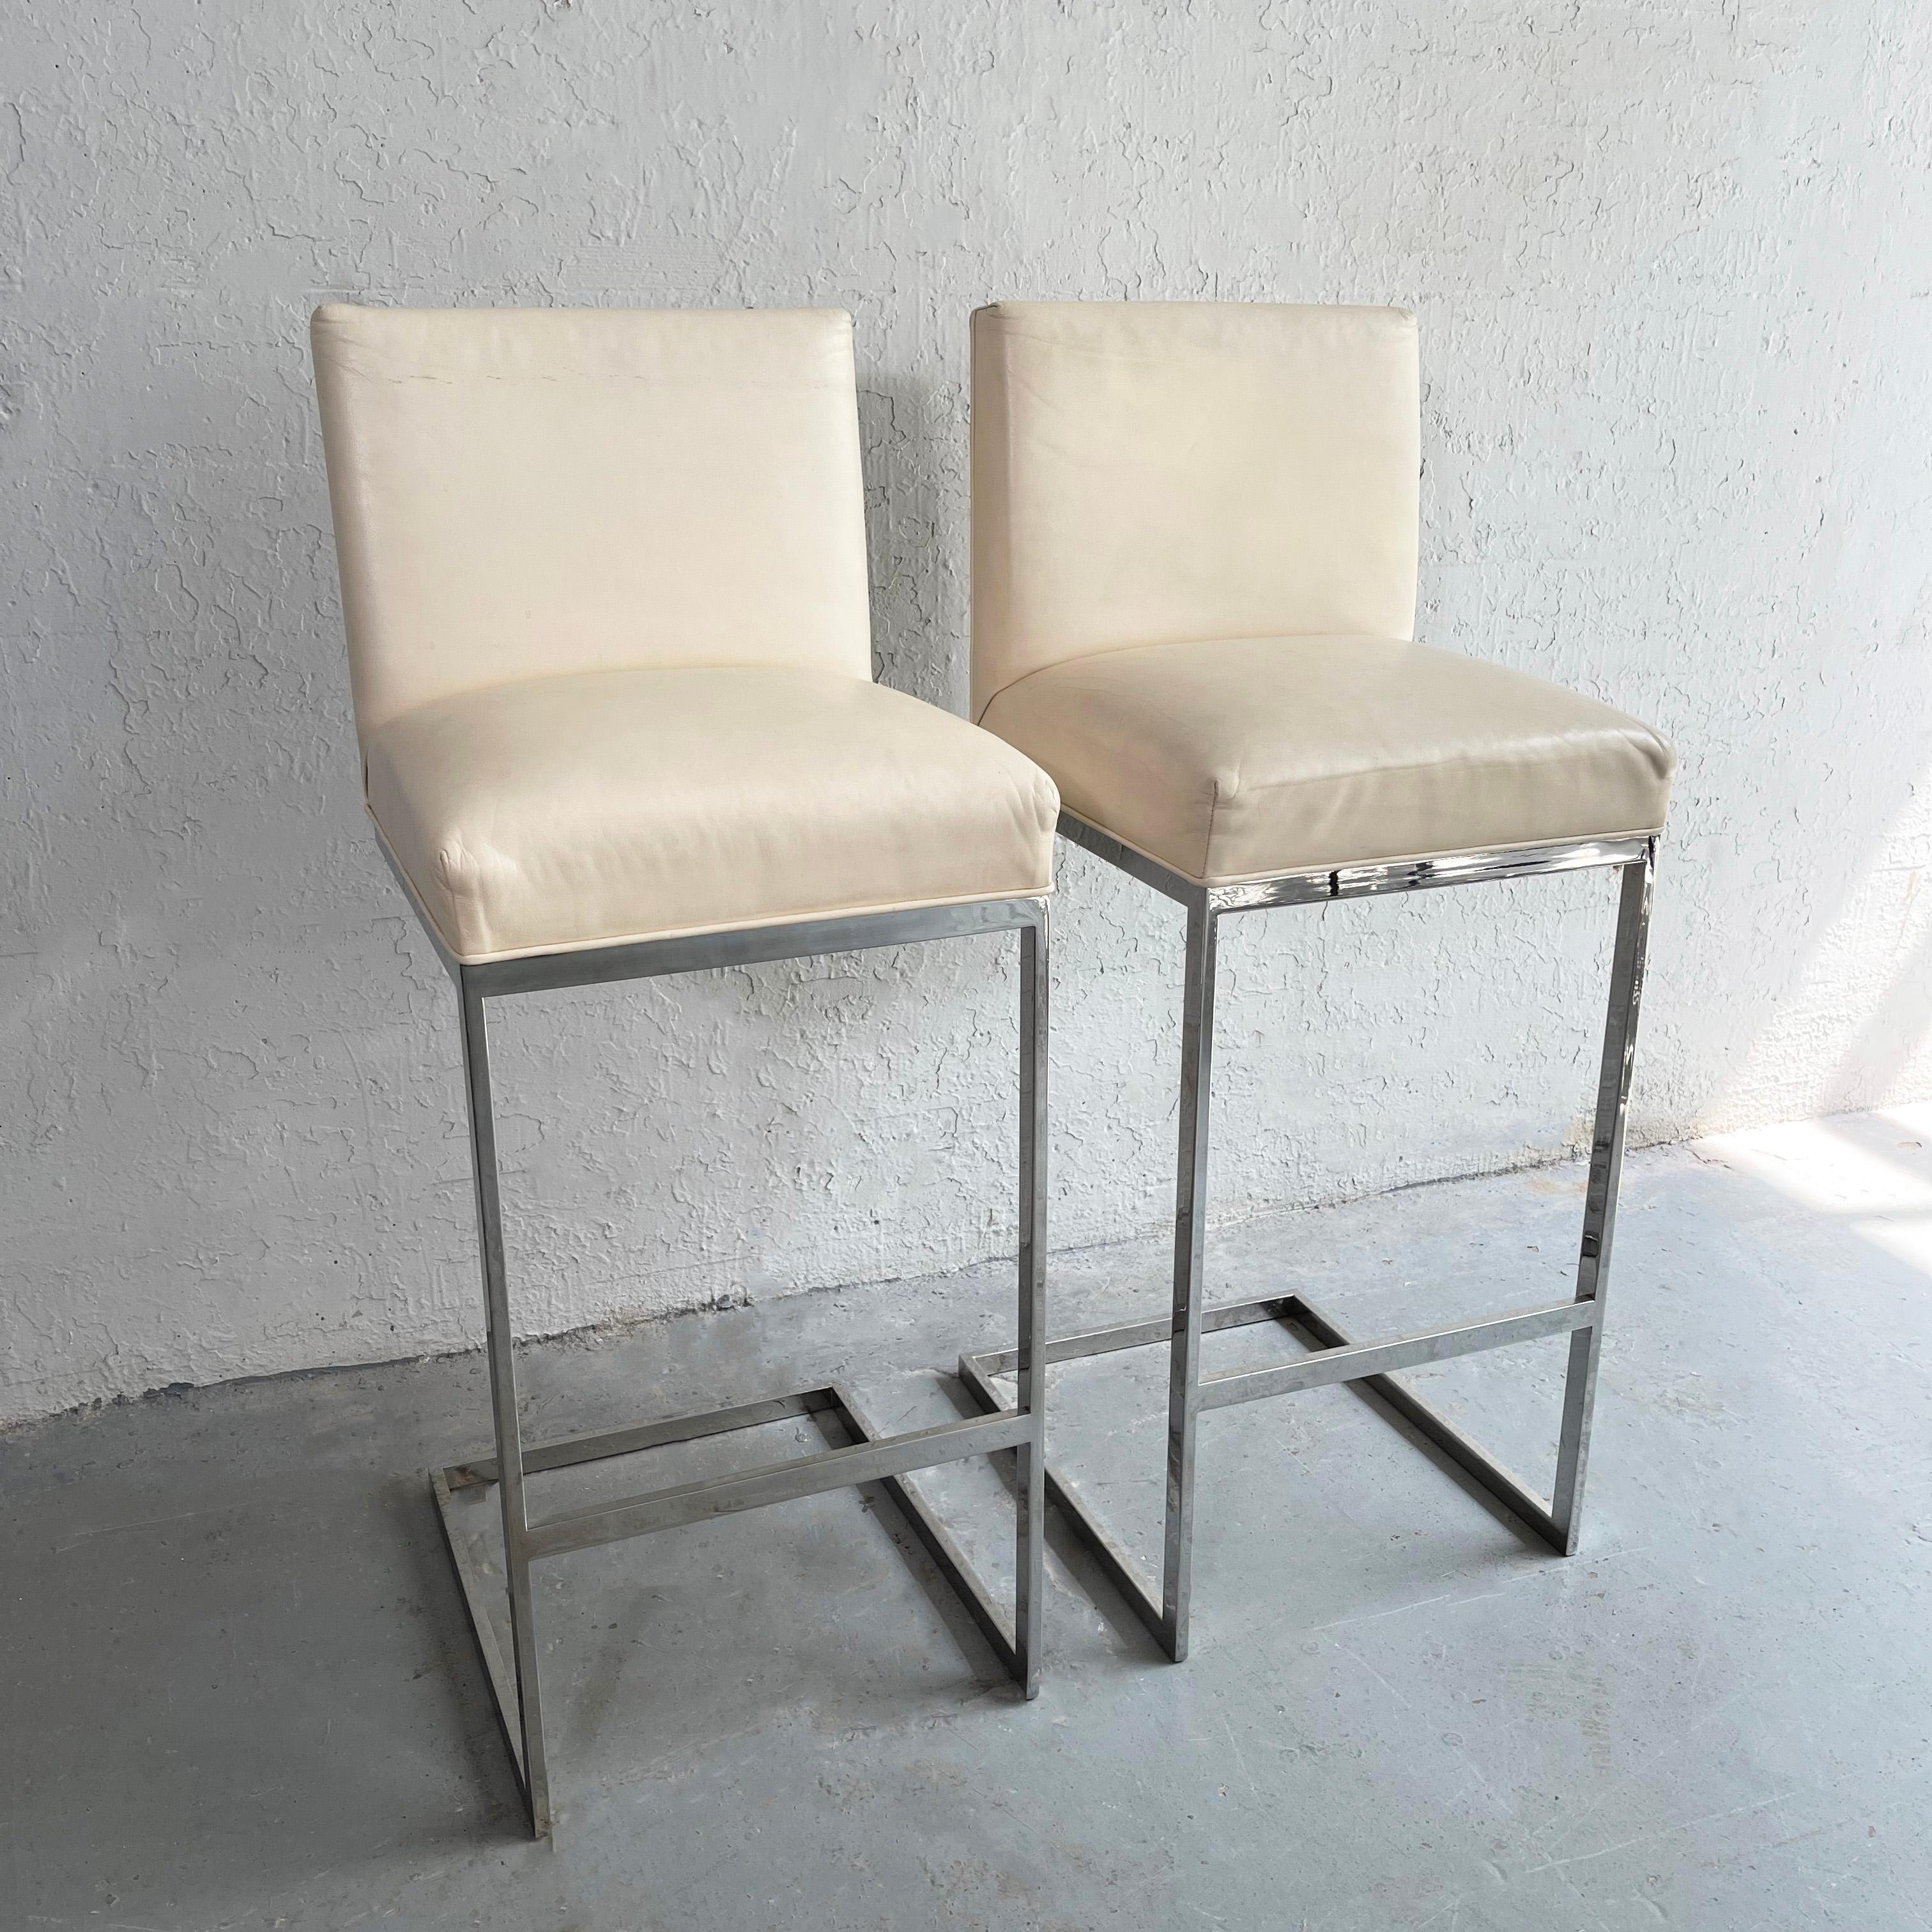 Pair of sleek, minimal, post-modern bar stools feature flat bar chrome, cantilever bases with cream leather upholstery.